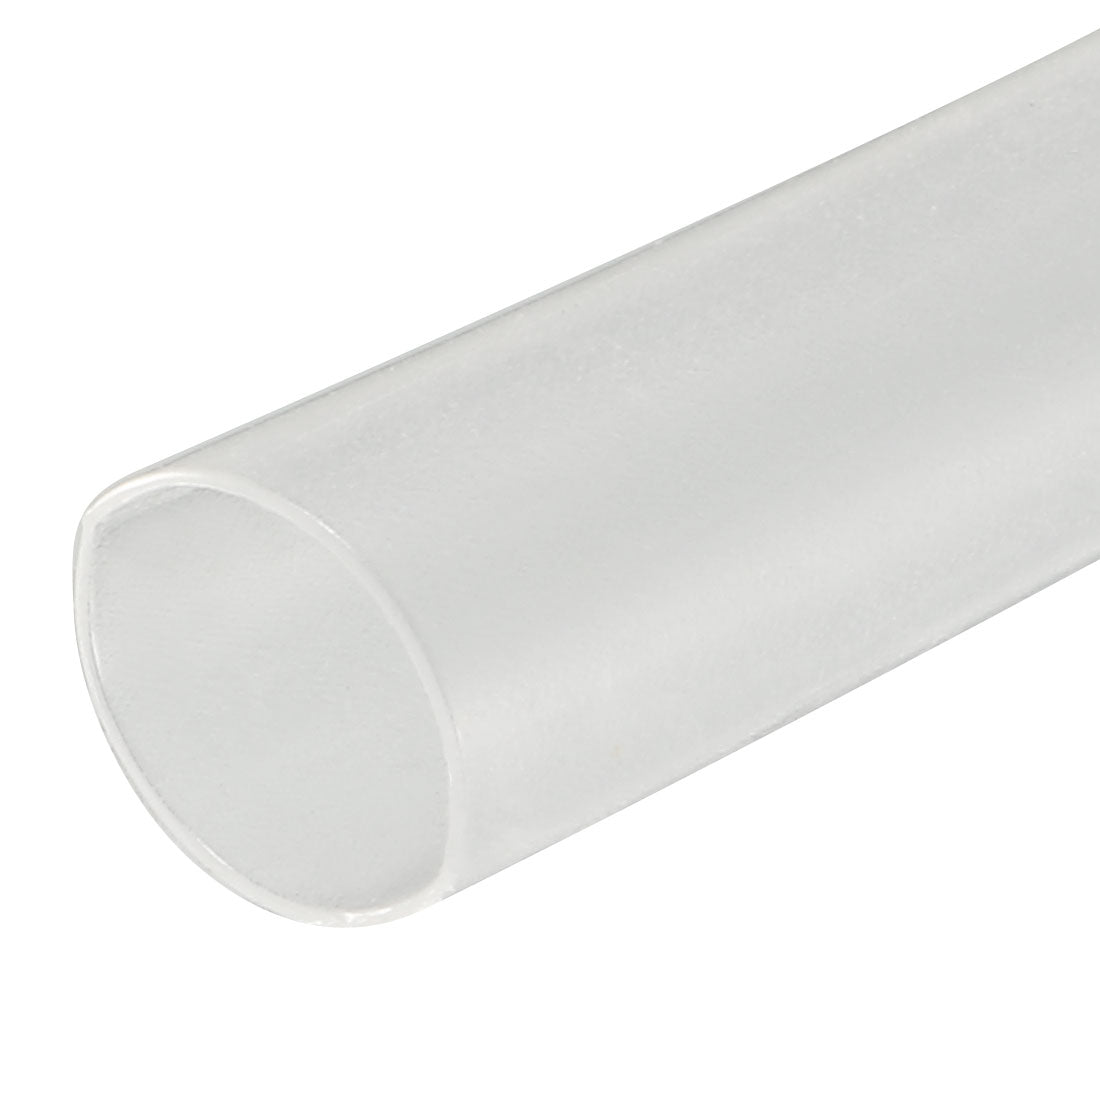 uxcell Uxcell Heat Shrink Tube 2:1 Electrical Insulation Tube Wire Cable Tubing Sleeving Wrap Clear 4mm Diameter 1m Long